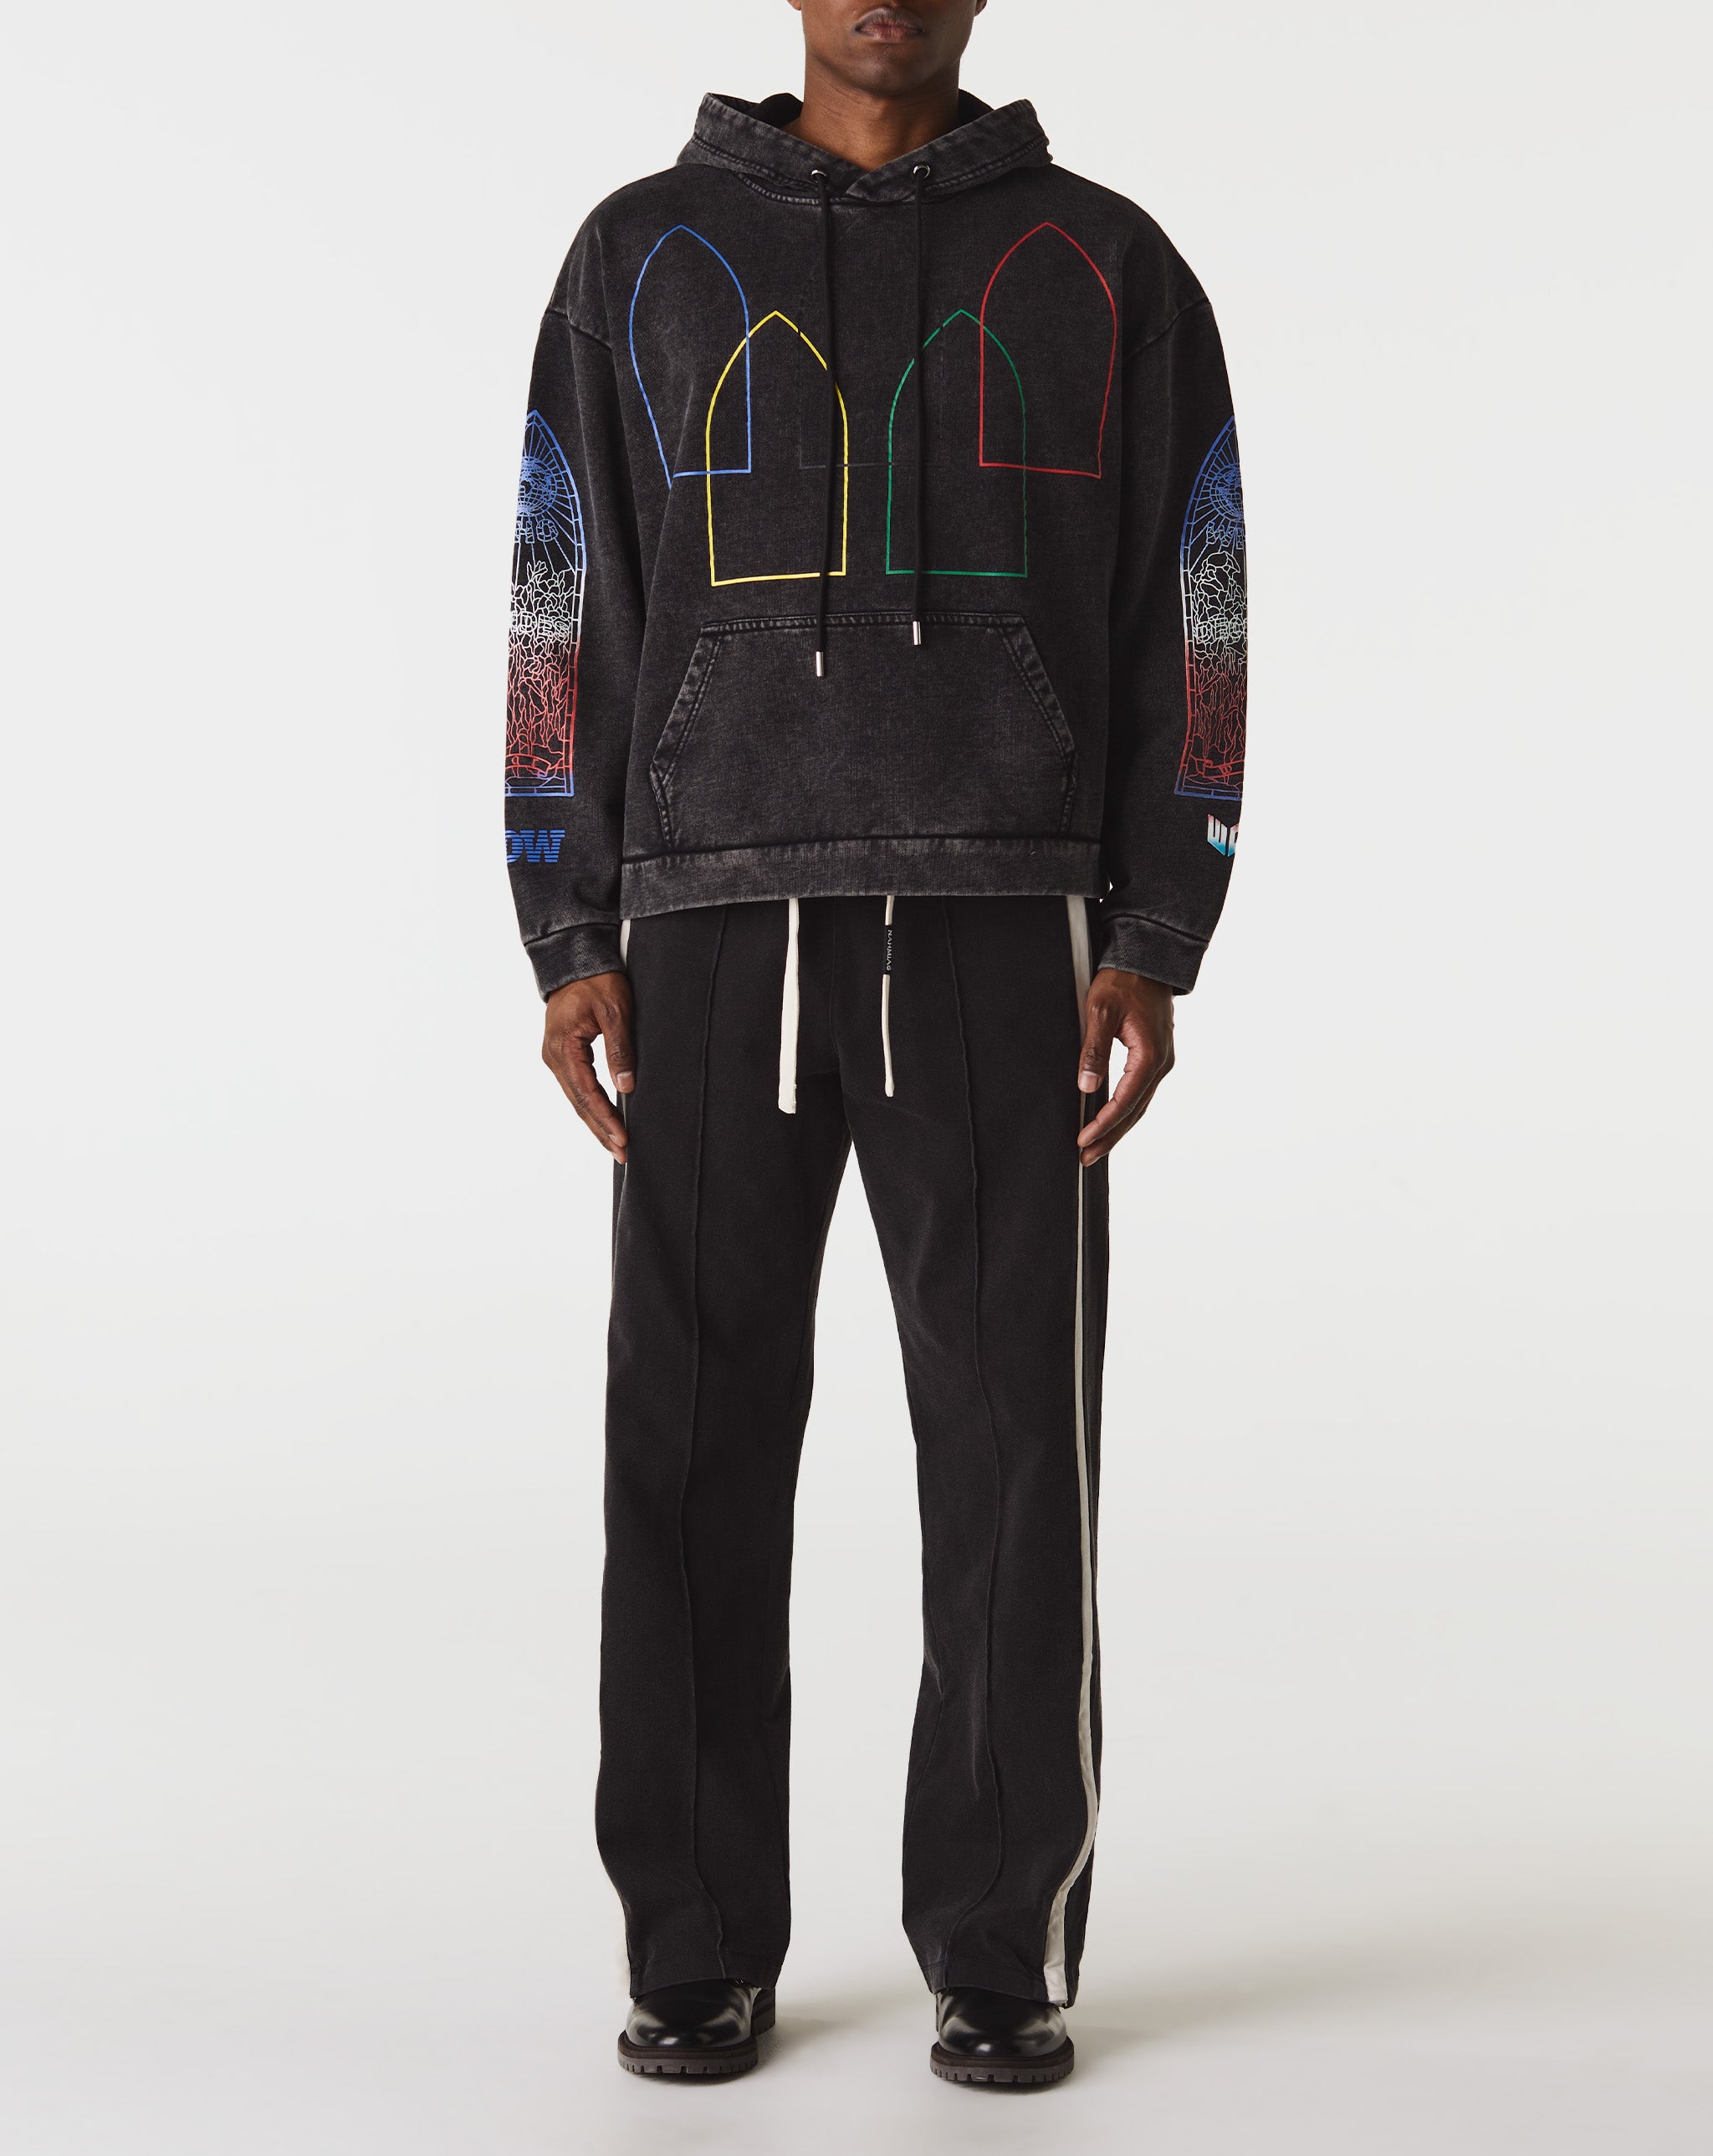 Who Decides War Intertwined Windows Hoodie  - Cheap 127-0 Jordan outlet